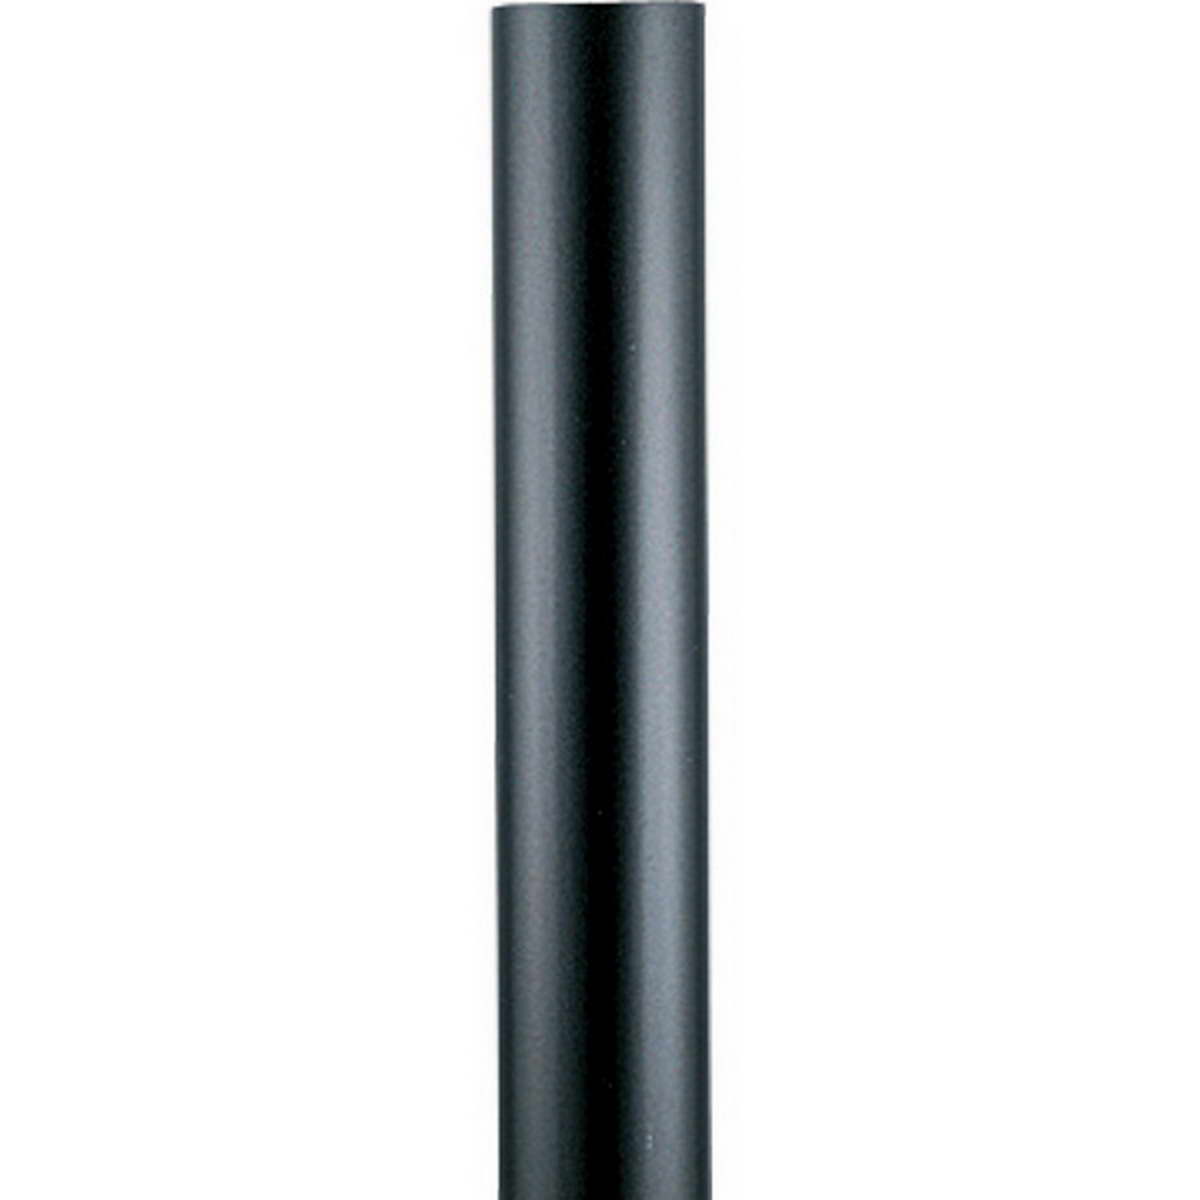 12 Ft Round Aluminum Direct Burial Pole 3 In. Shaft Black Finish